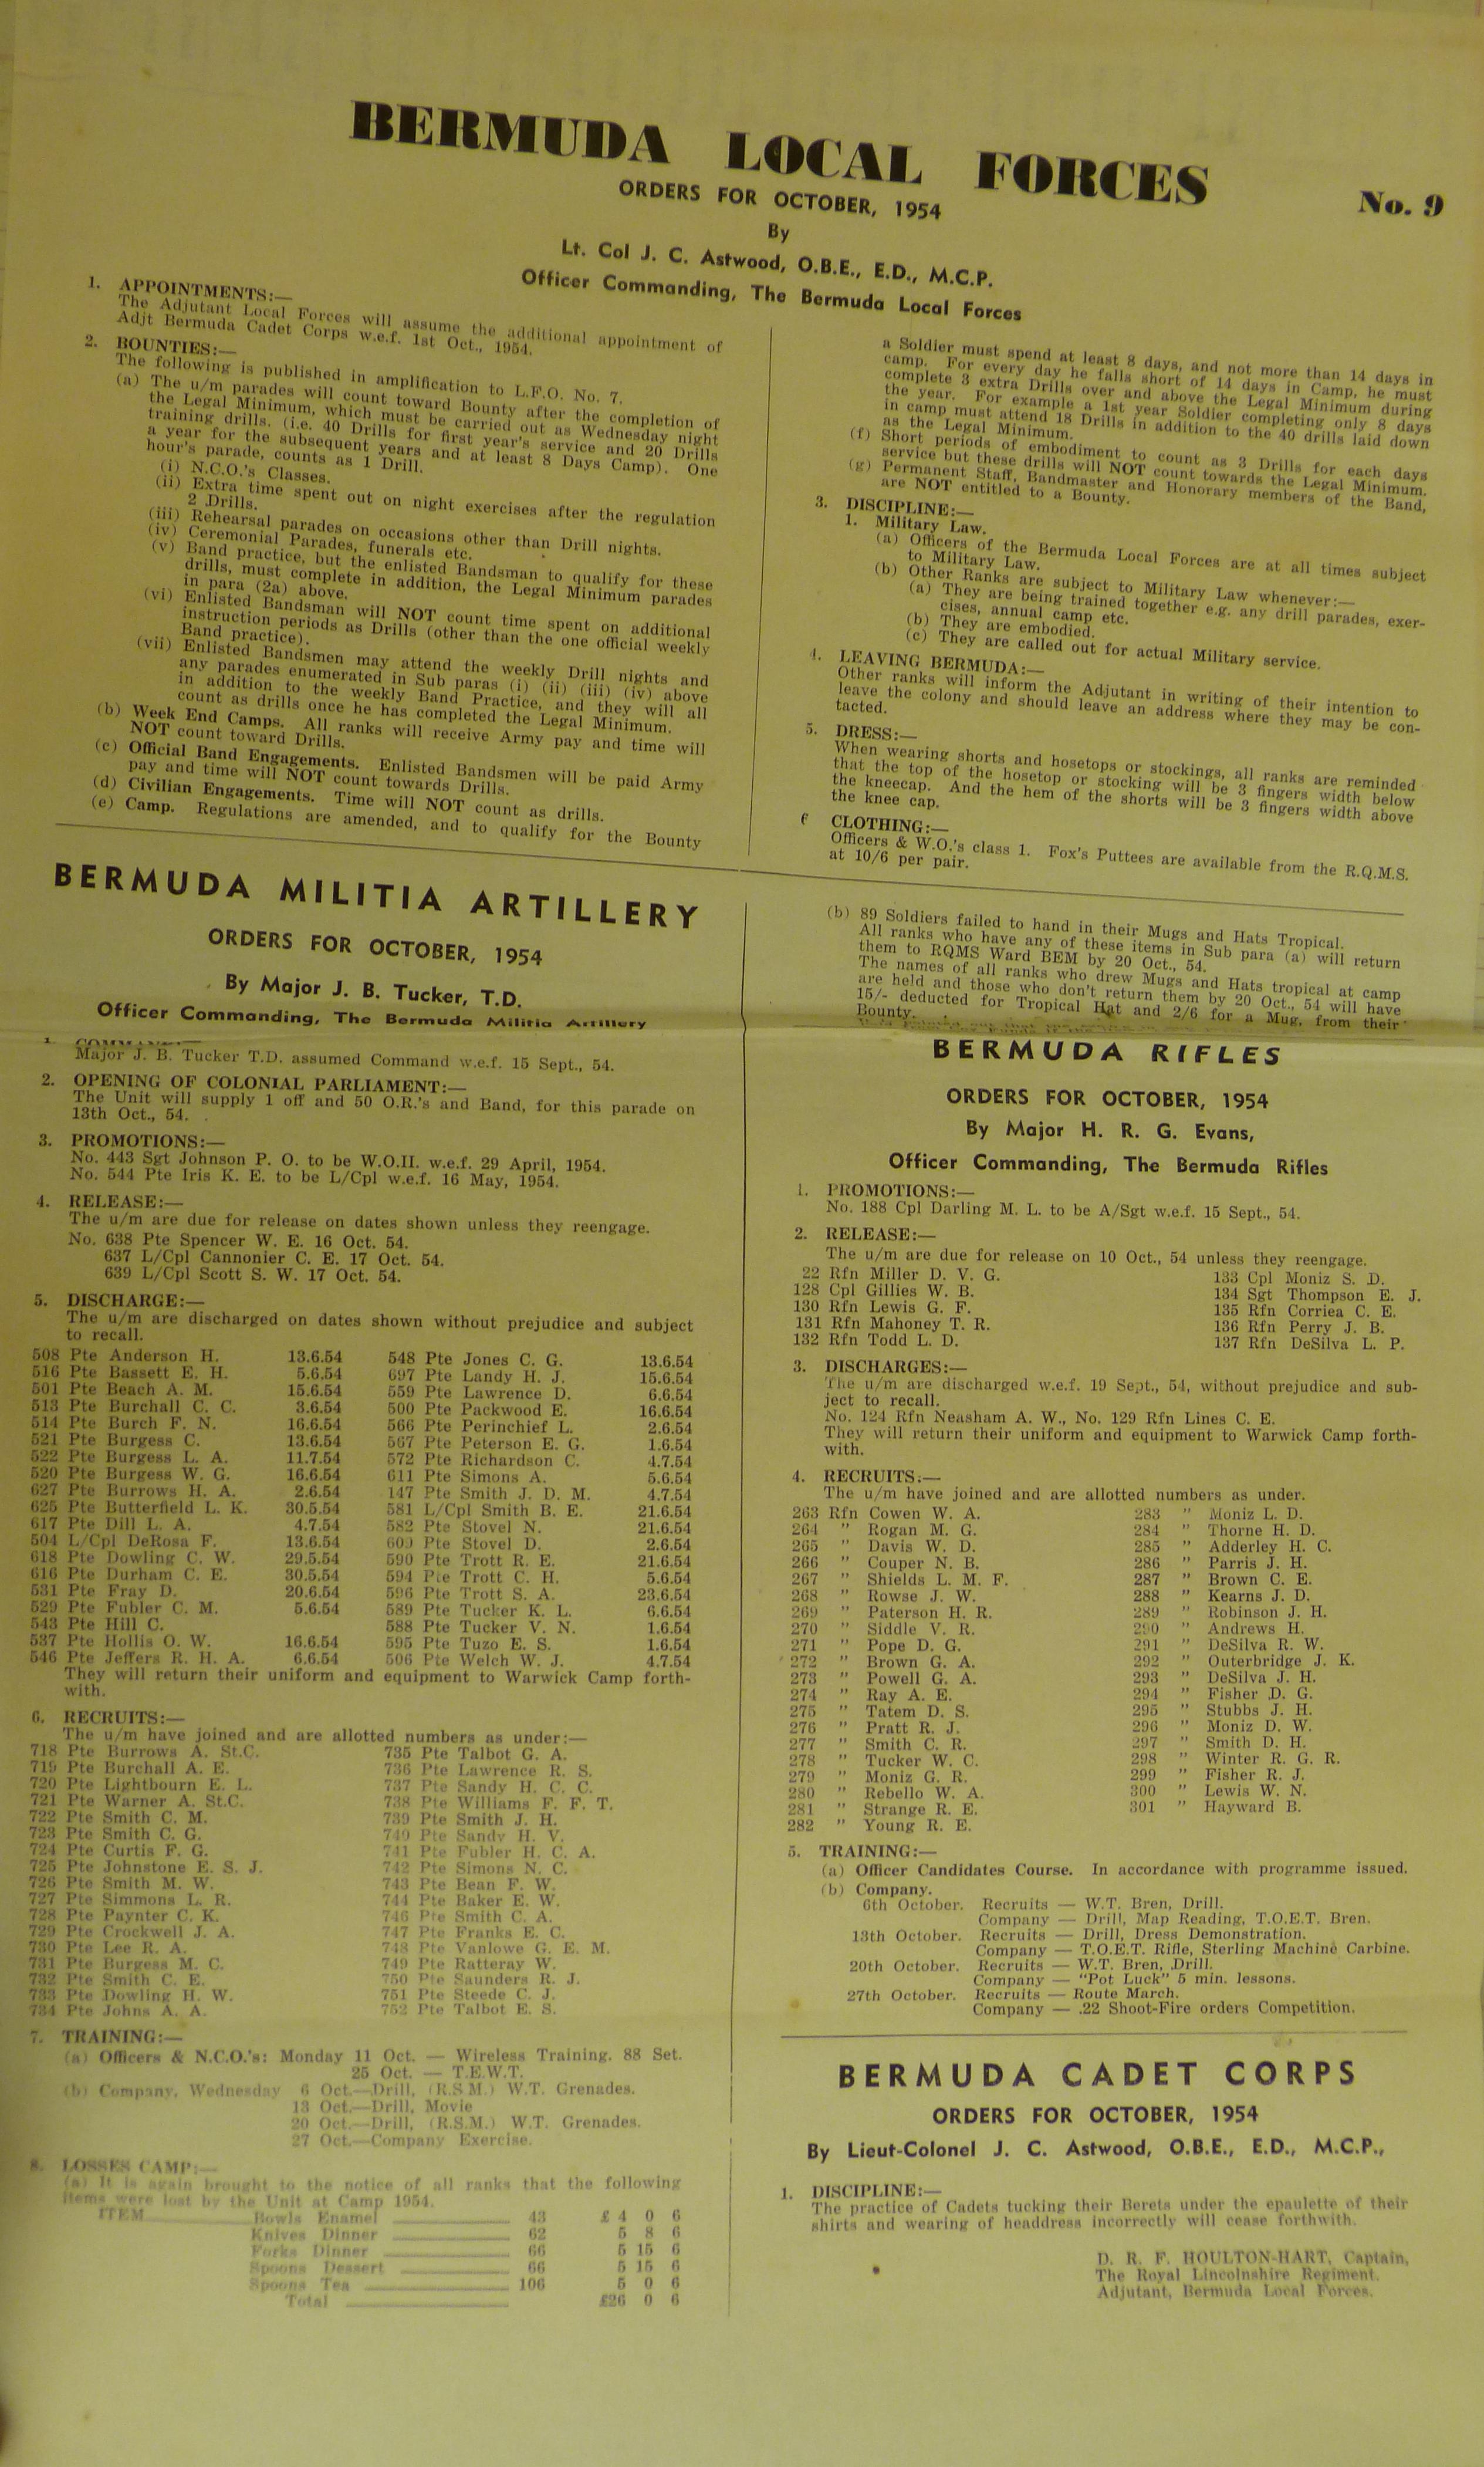 File:Bermuda Forces Orders 9 for October, 1954.jpg Wikimedia Commons